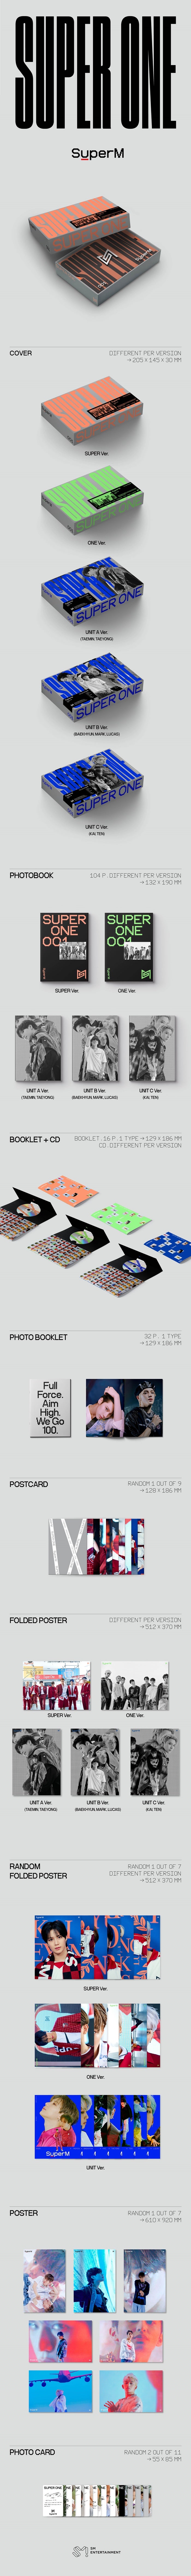 1 CD
2 Folding Poster On Packs
1 Photo Book (104 pages)
1 Booklet (32 pages)
1 Post